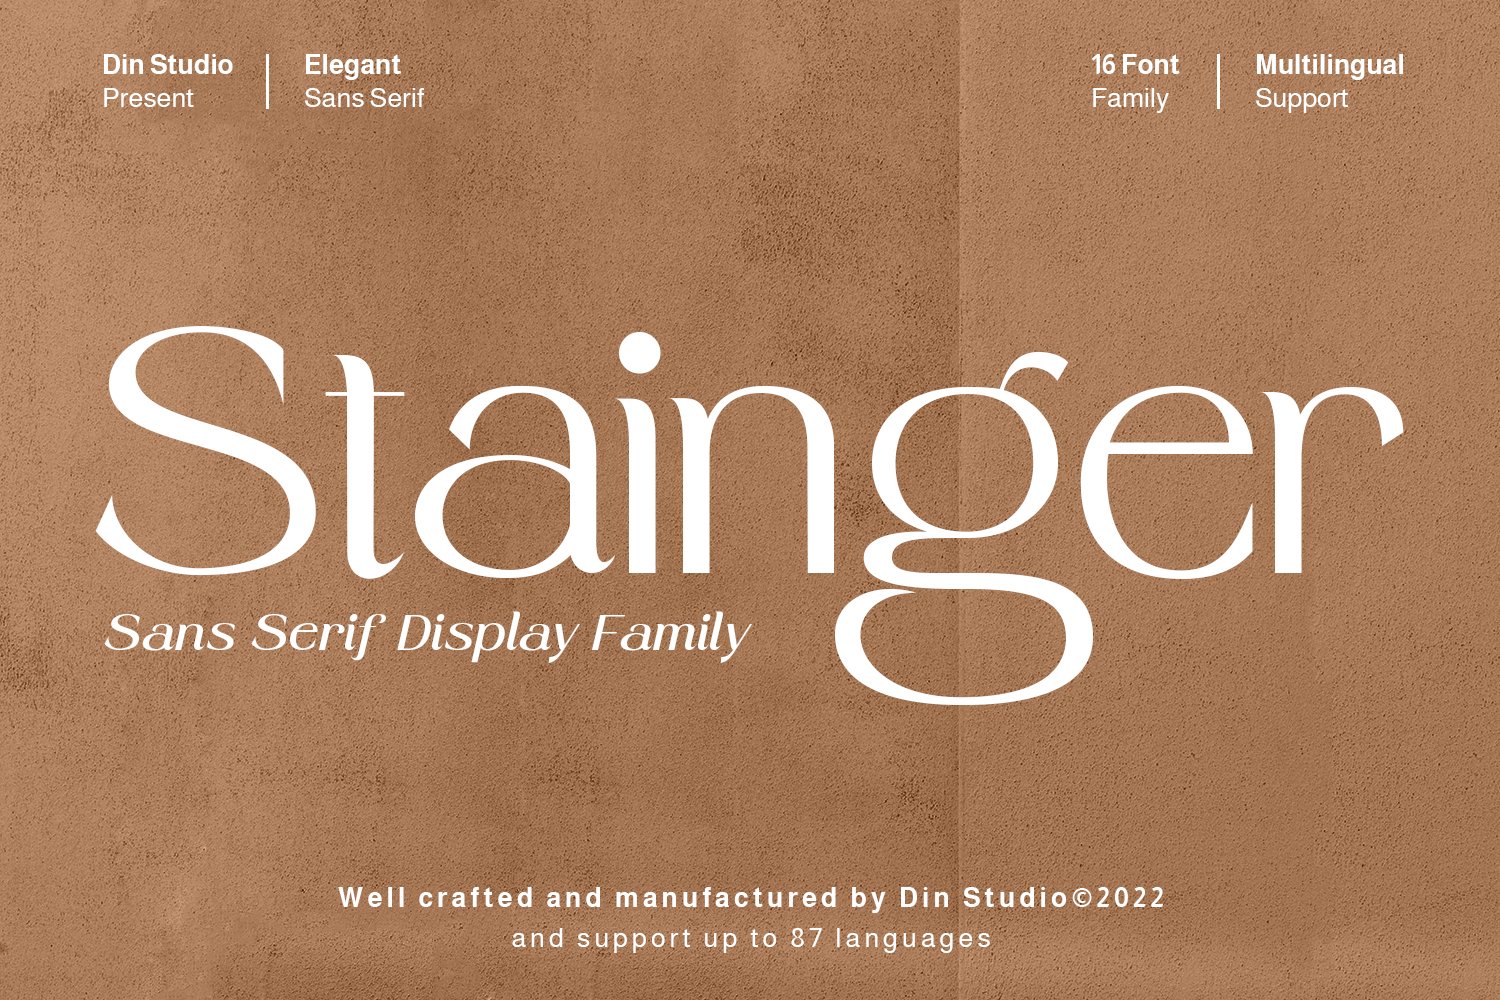 Stainger cover image.